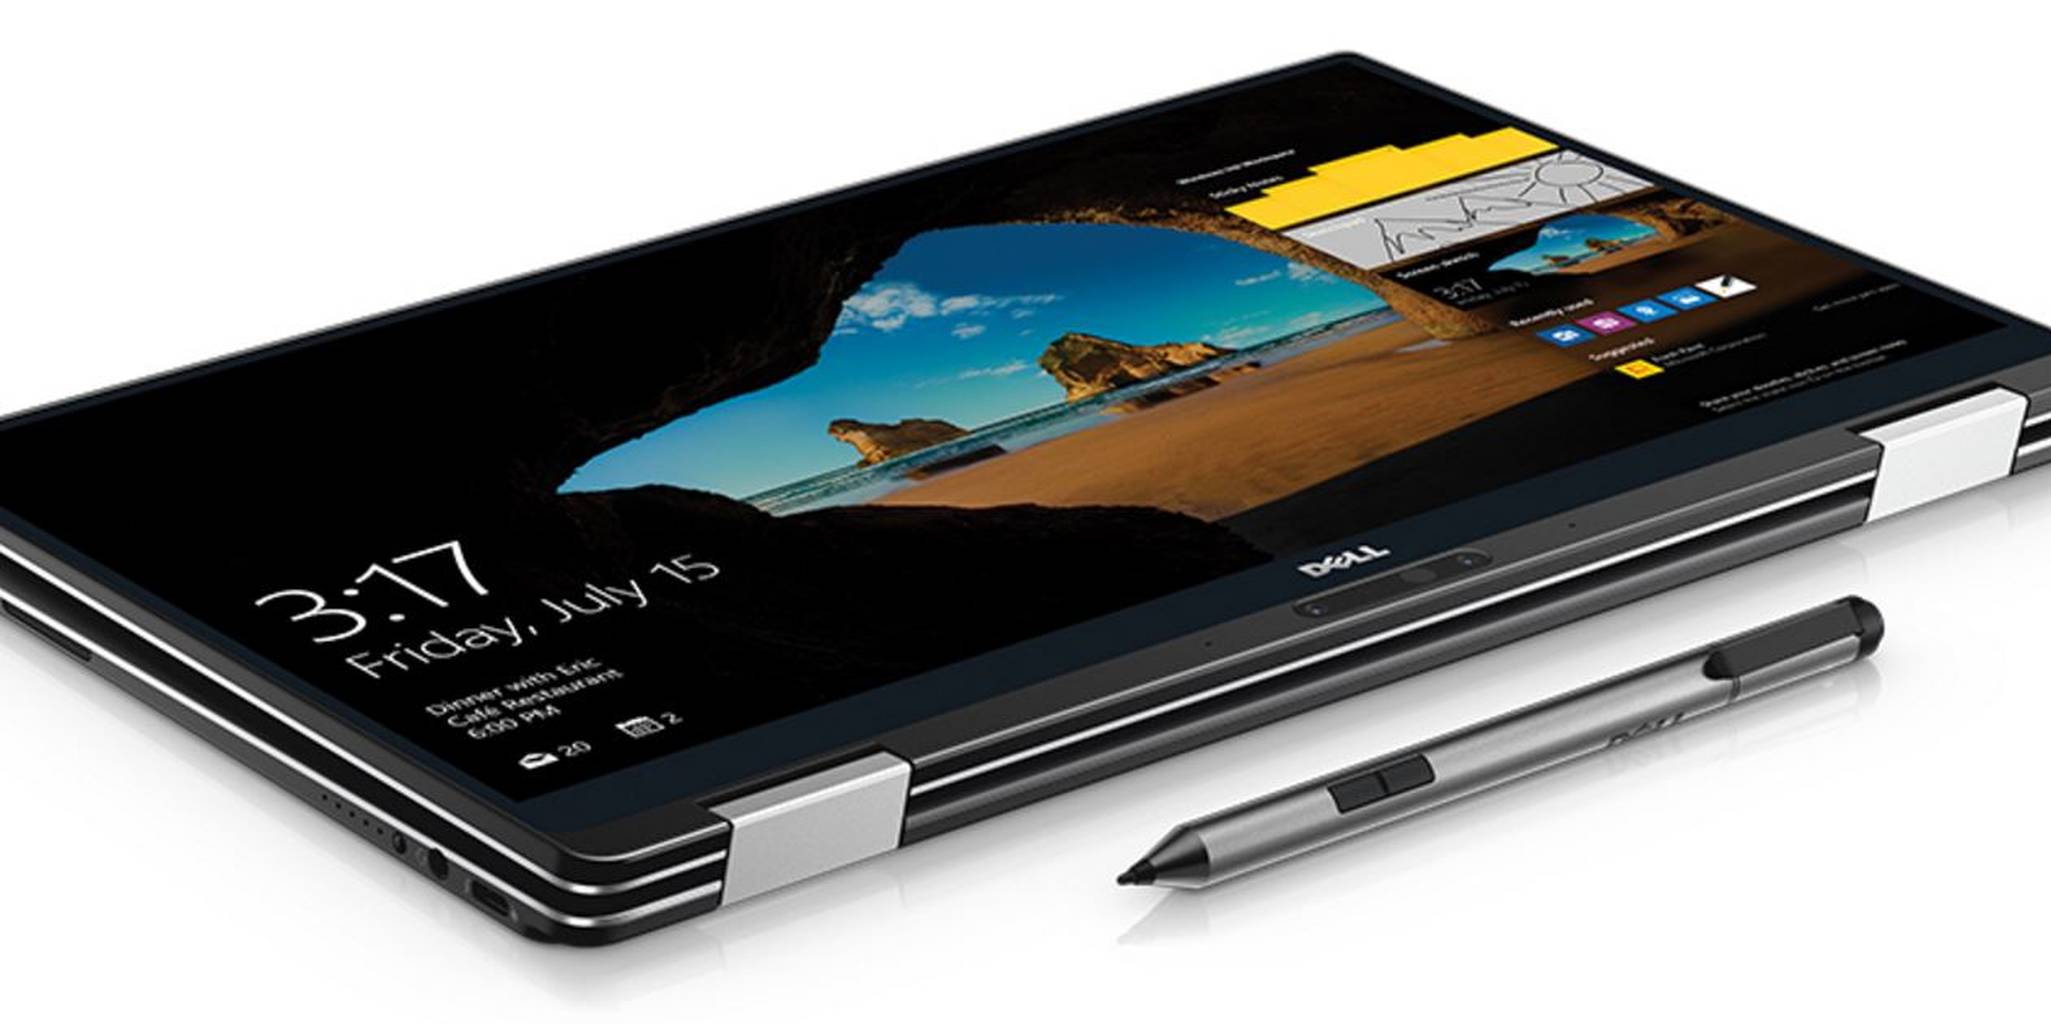 Dell XPS 13 2-in 1 laptop With Stylus Pen Accessory